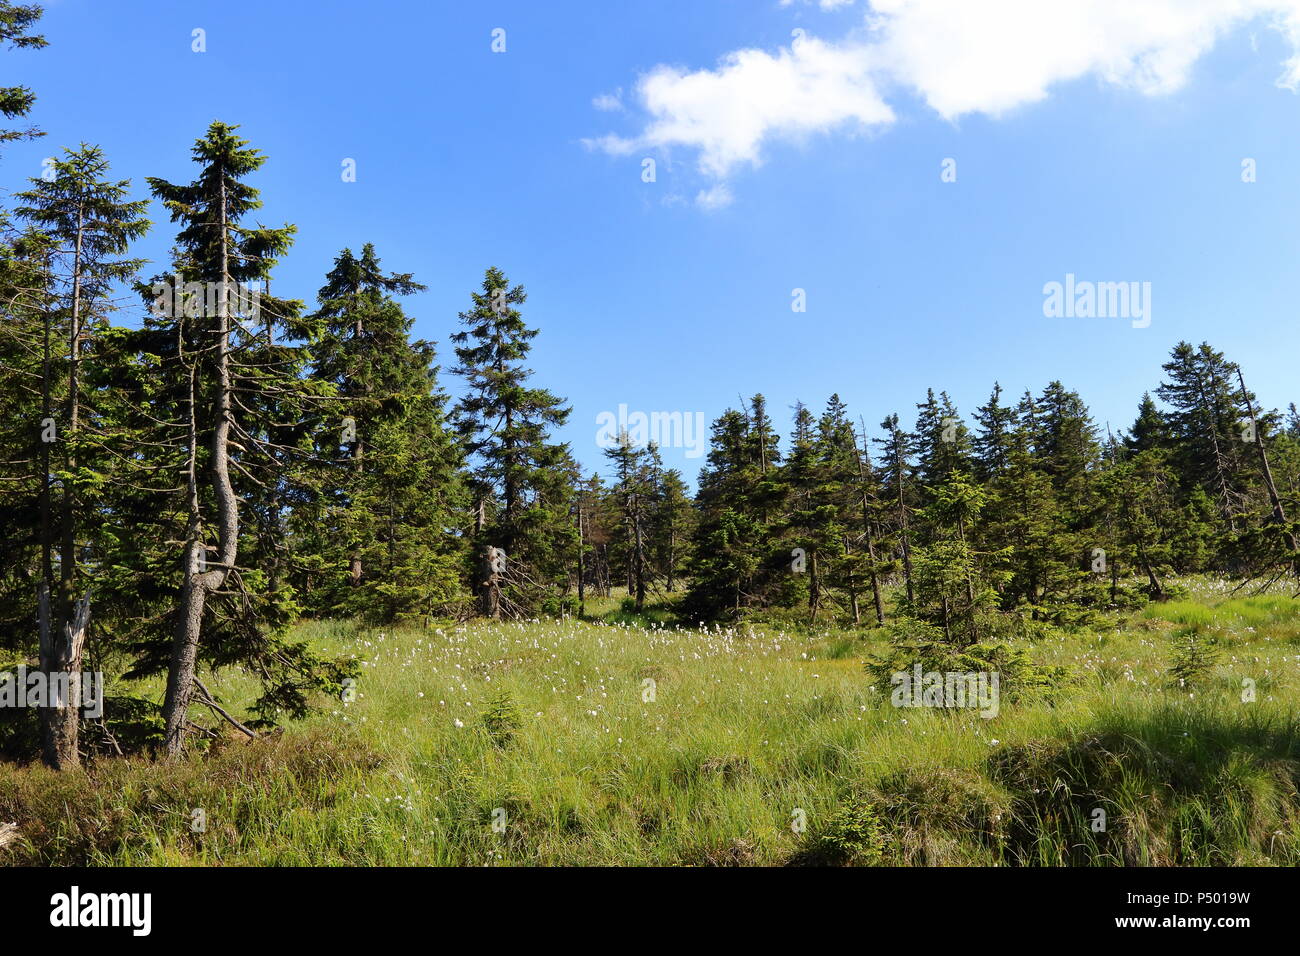 Scenery of the Harz mountain range in Germany. Forest, raised bog and cottongras near Mount Brocken, Saxony-Anhalt, Germany. Stock Photo